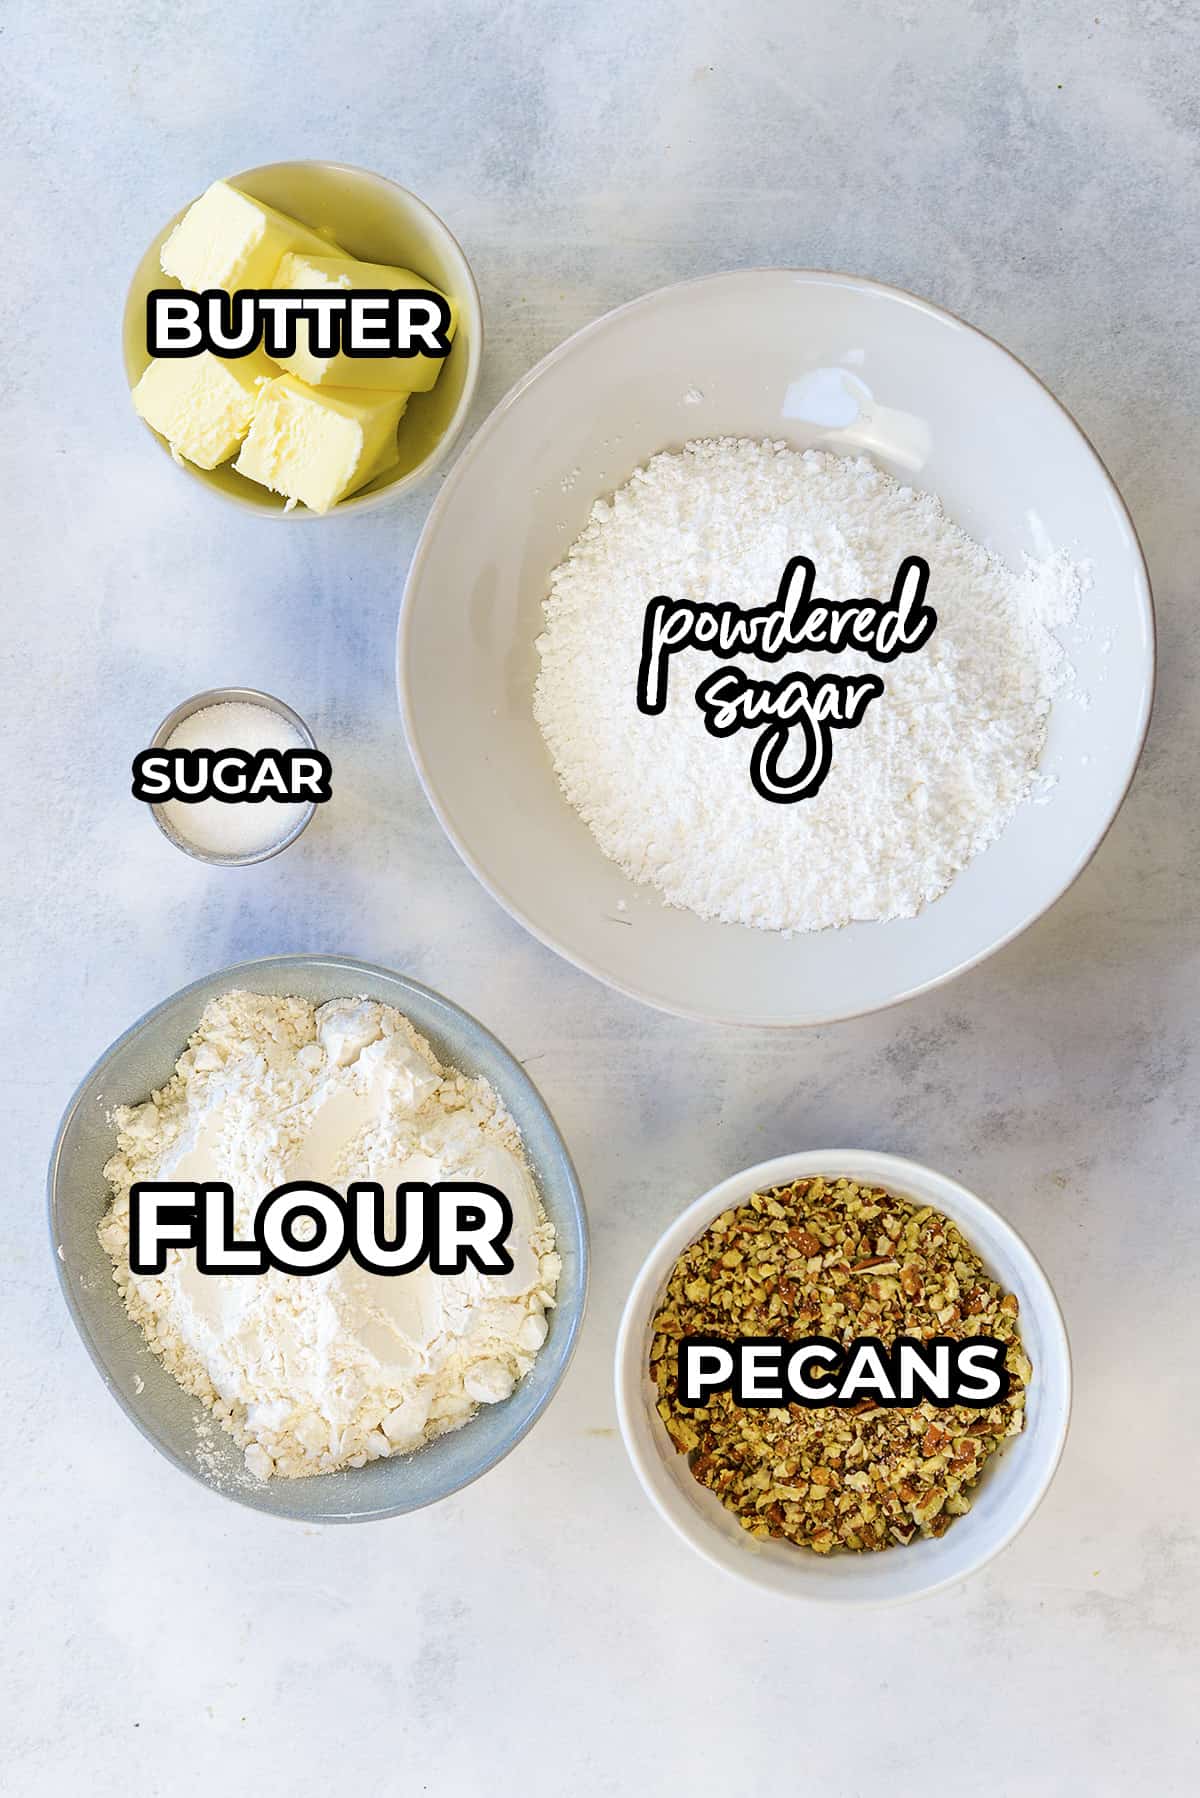 Ingredients for snowball cookies.